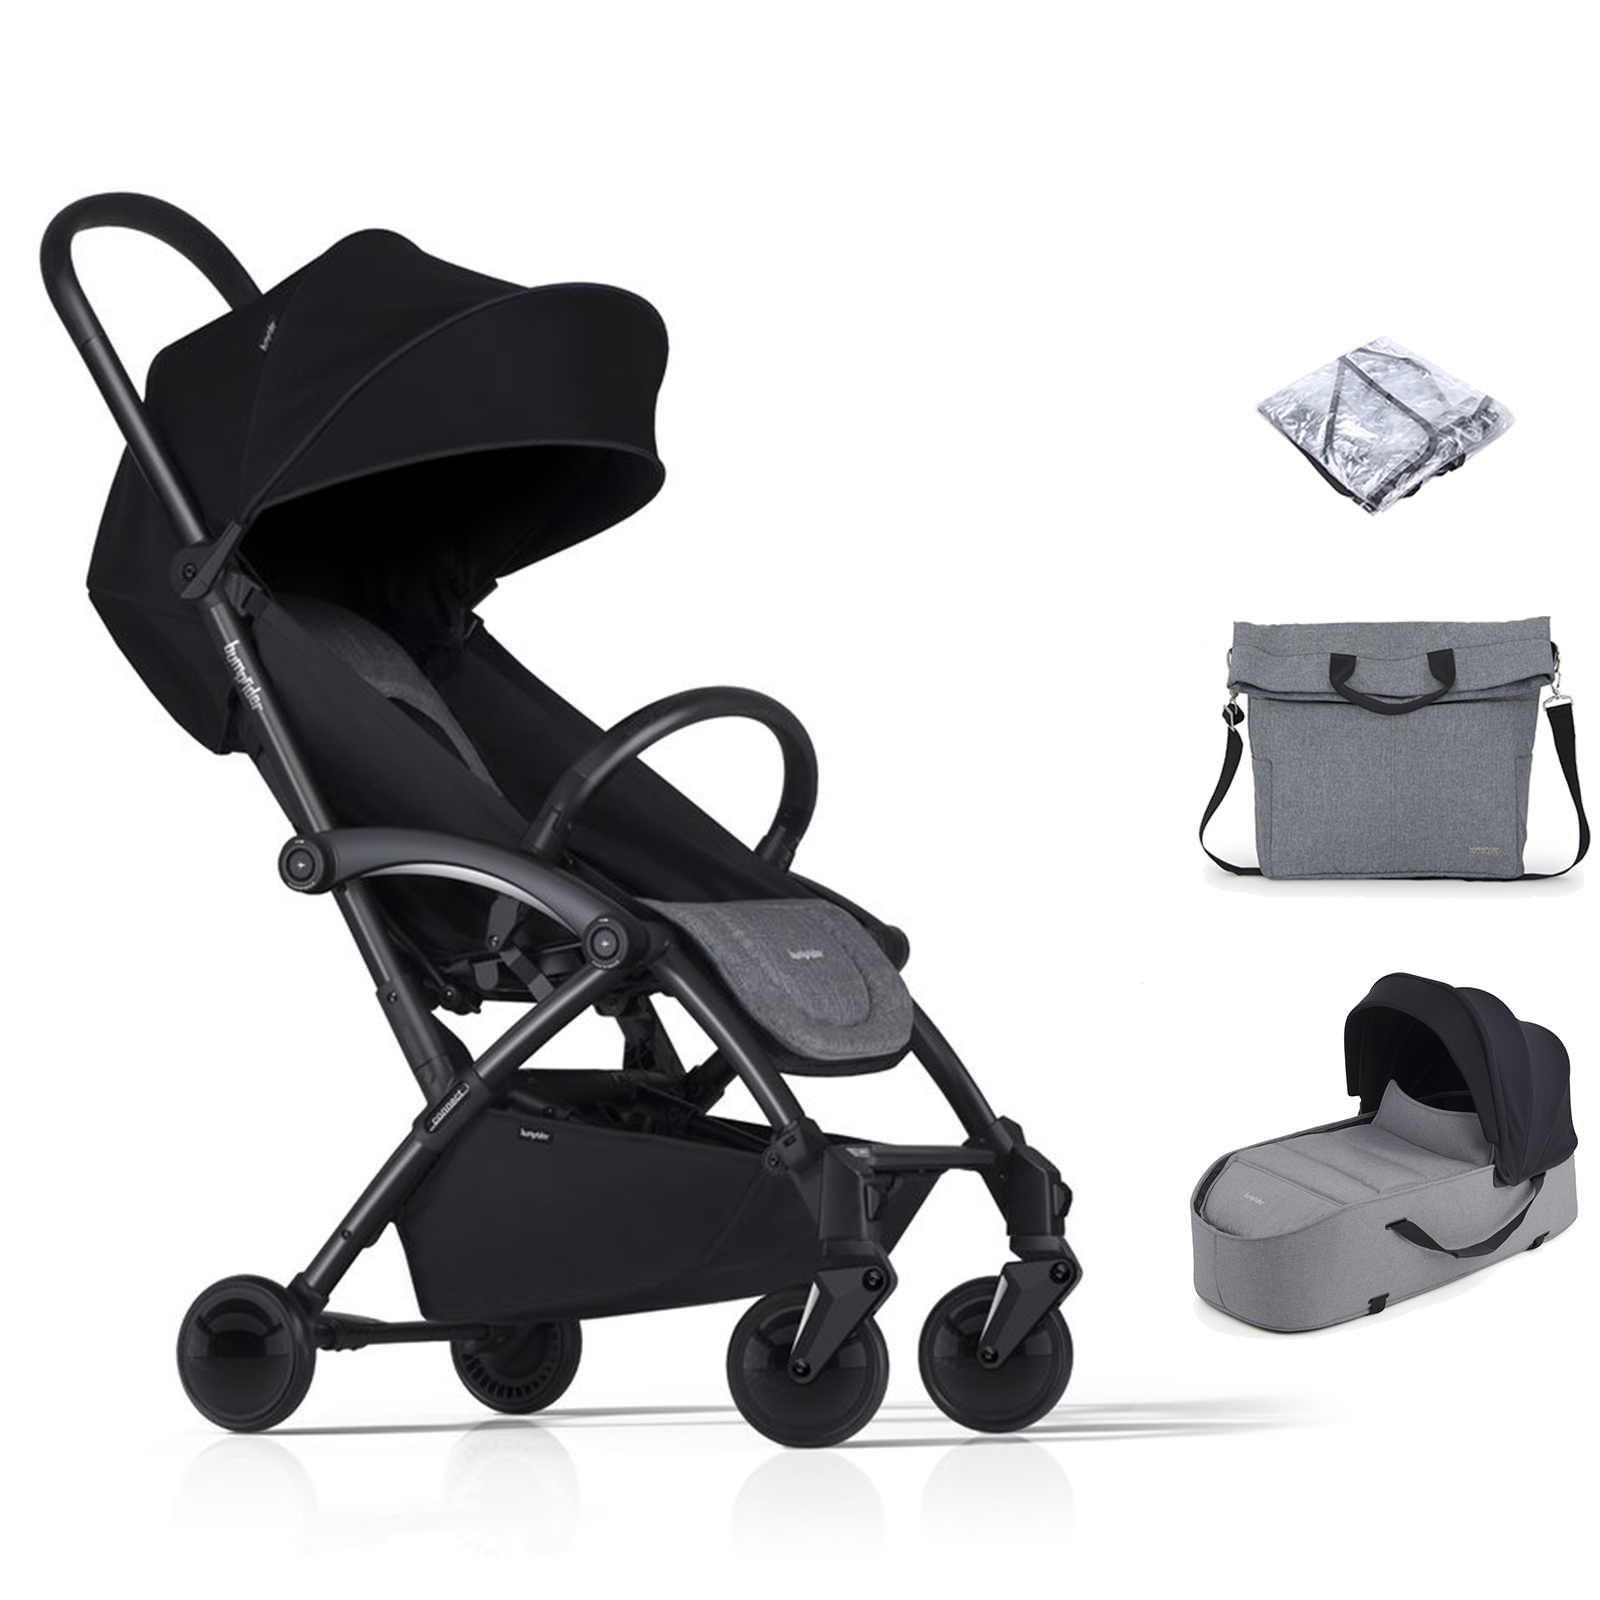 Bumprider Connect2 Stroller with Carrycot & Side Bag - Black & Grey